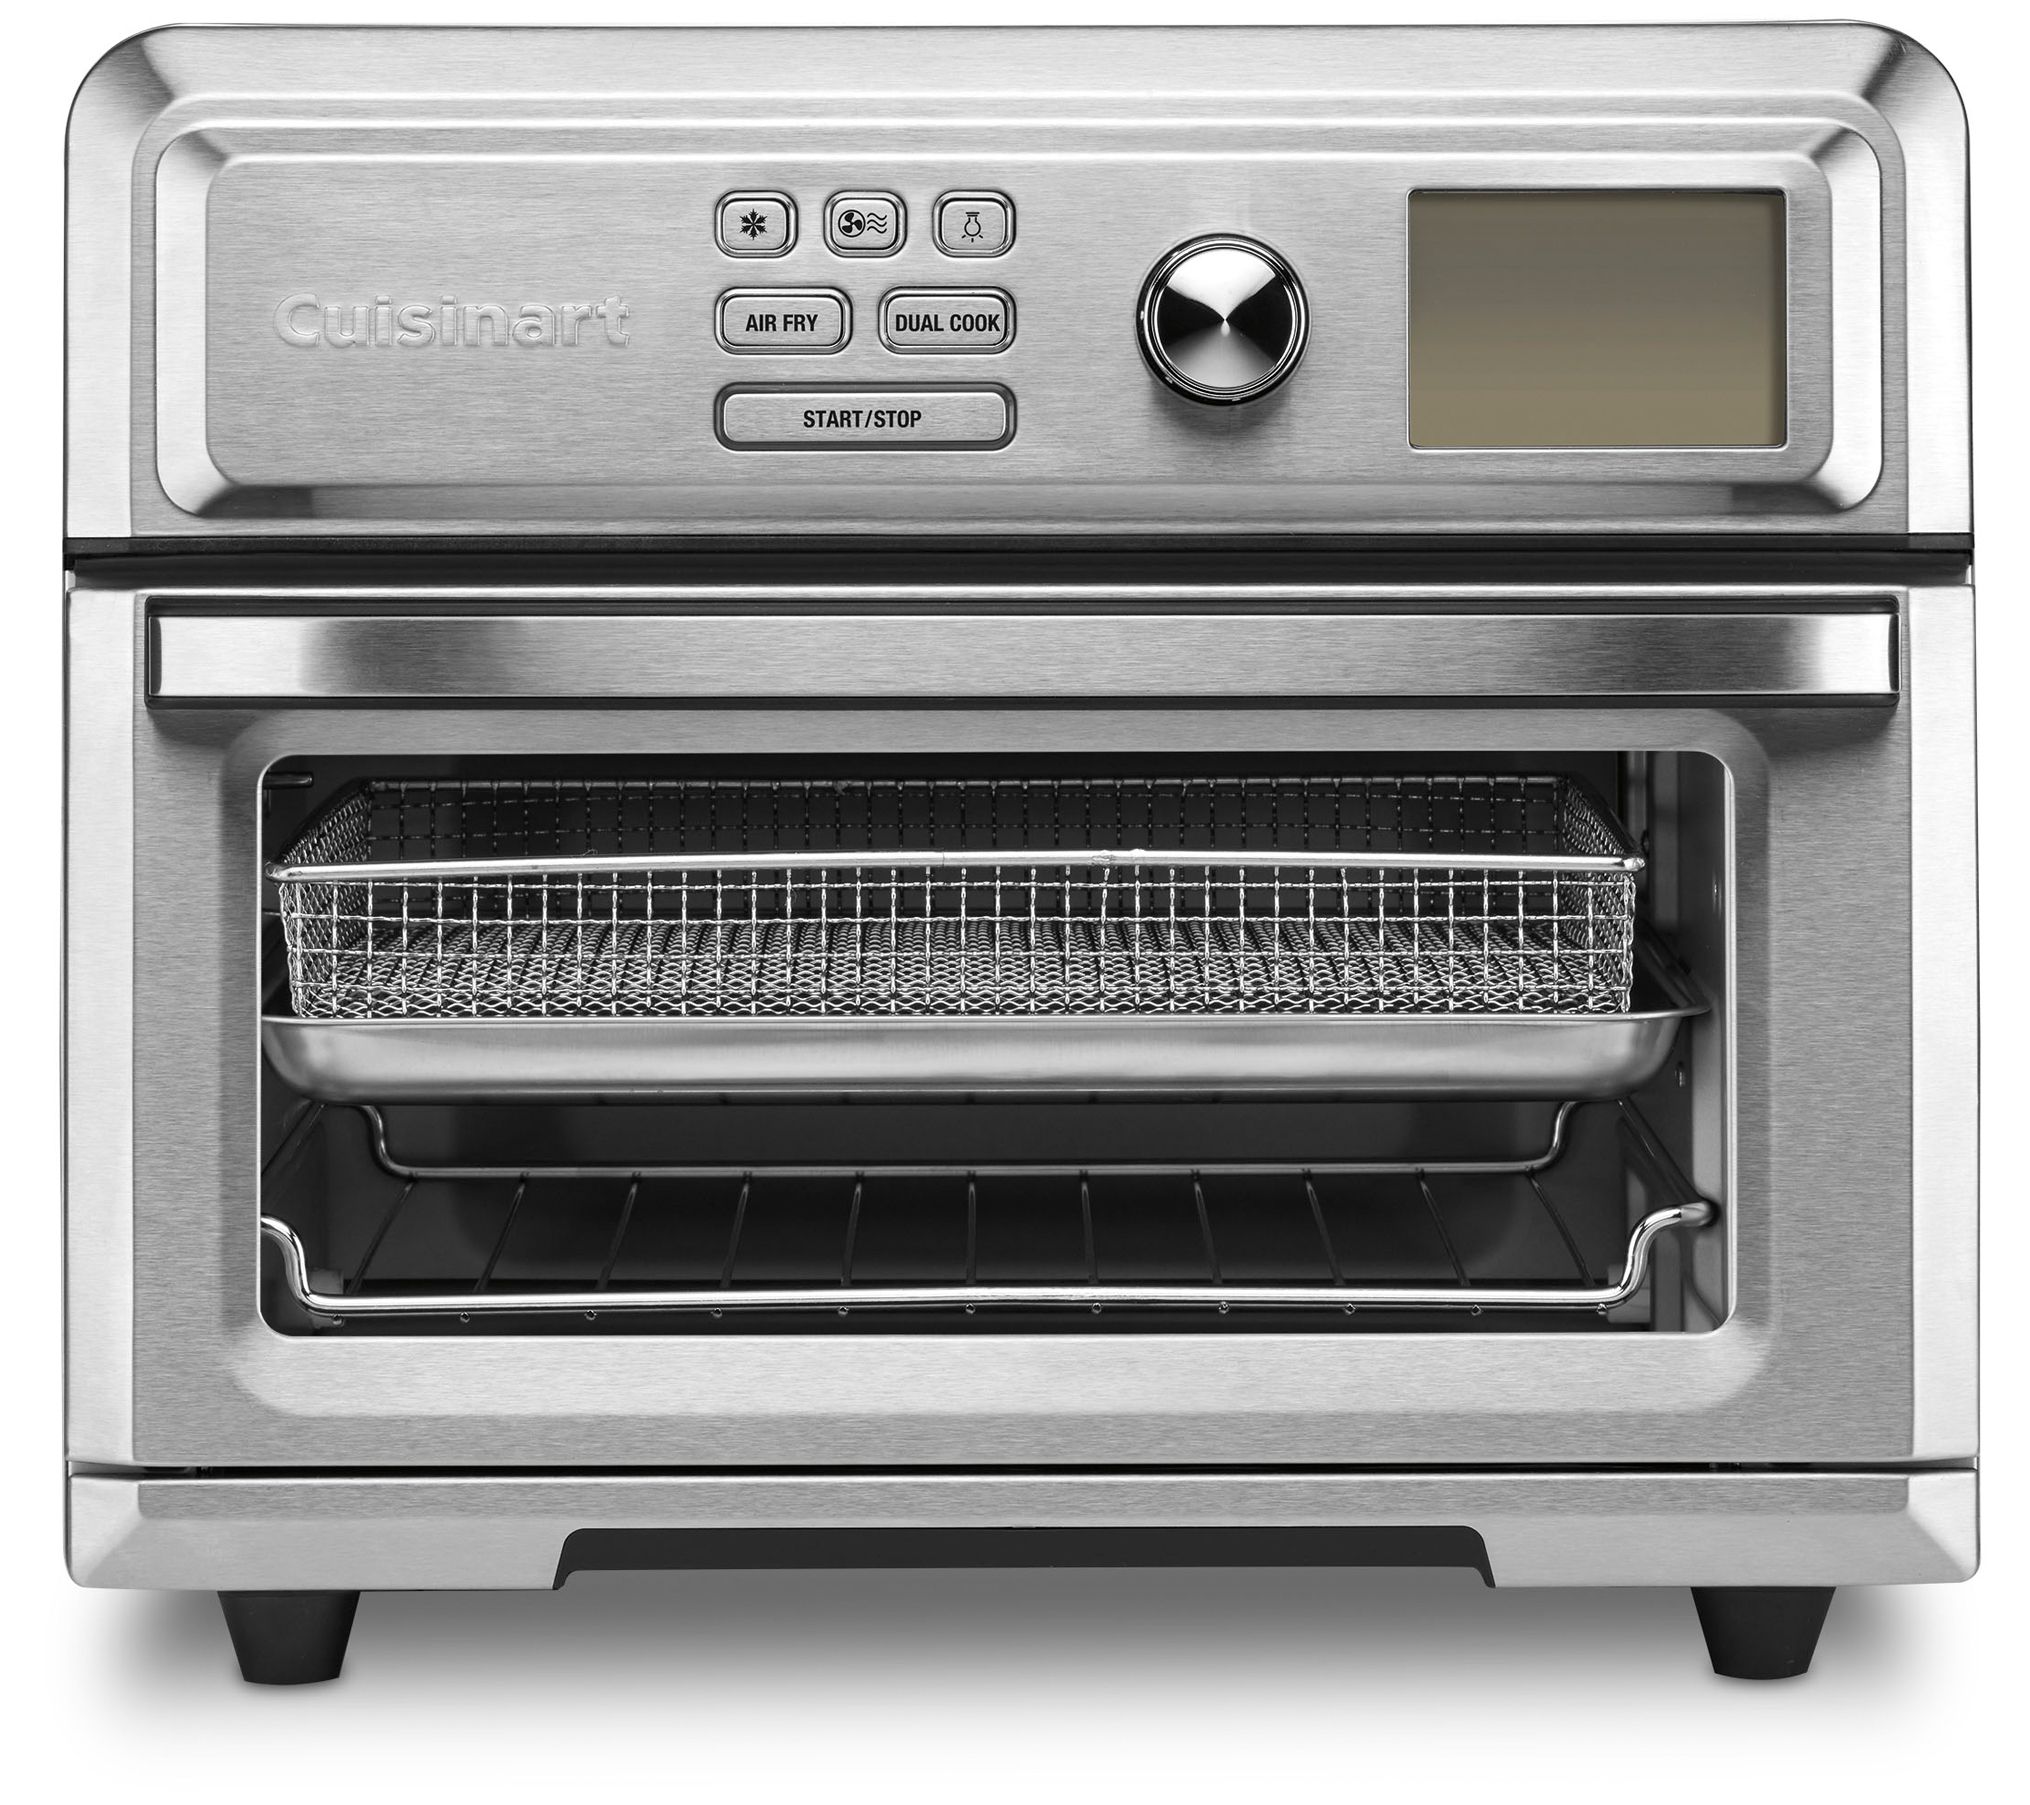 Cuisinart Air Fryer Toaster Oven Review: Is it Worth It? - Tested